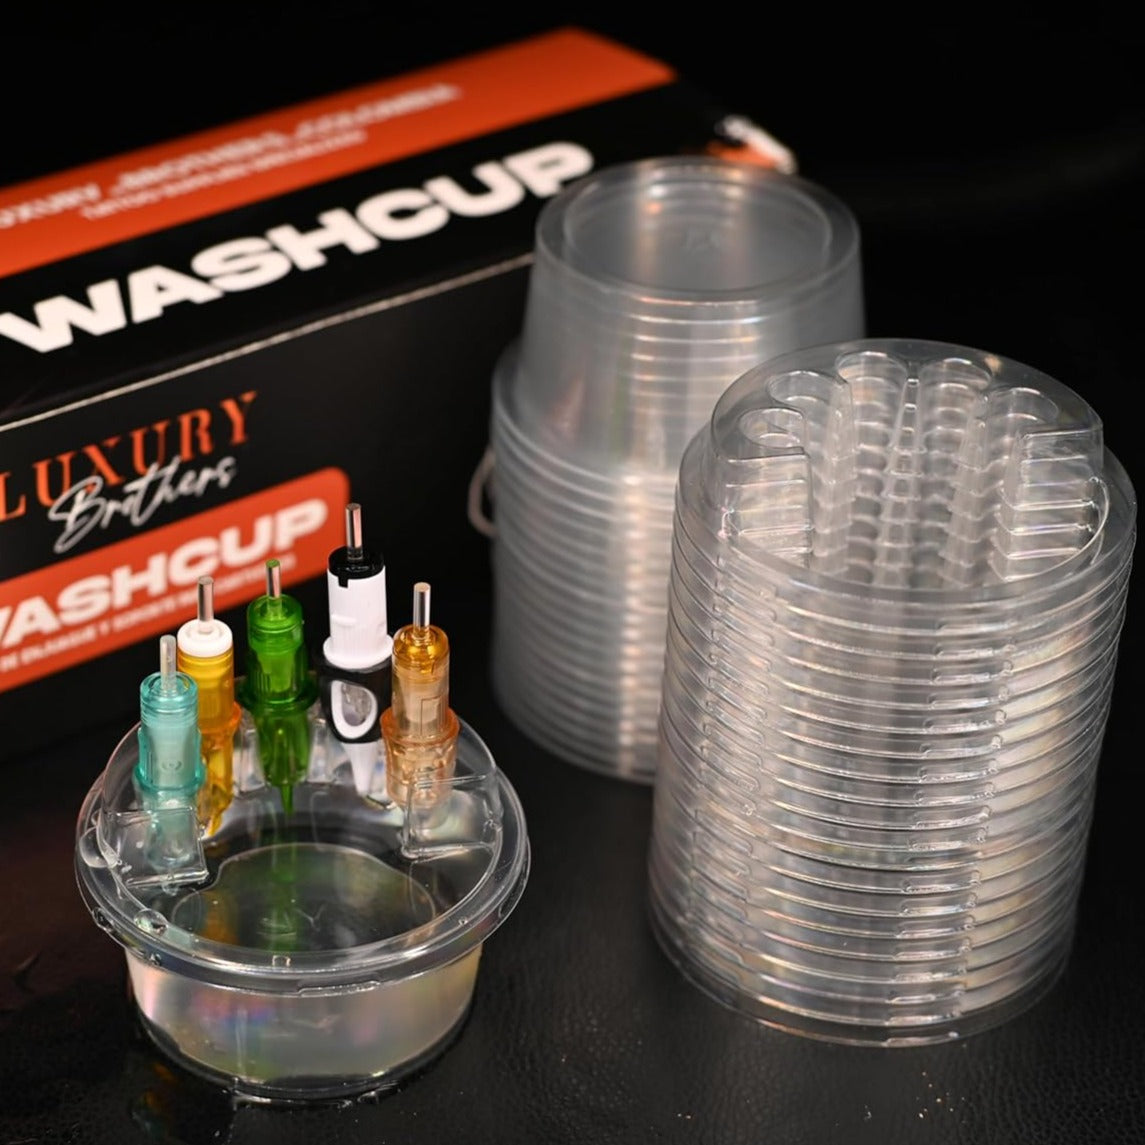 Washcup Tattoo Cartridge Holders and Rinse Cups - 20pcs of Cups & Lids